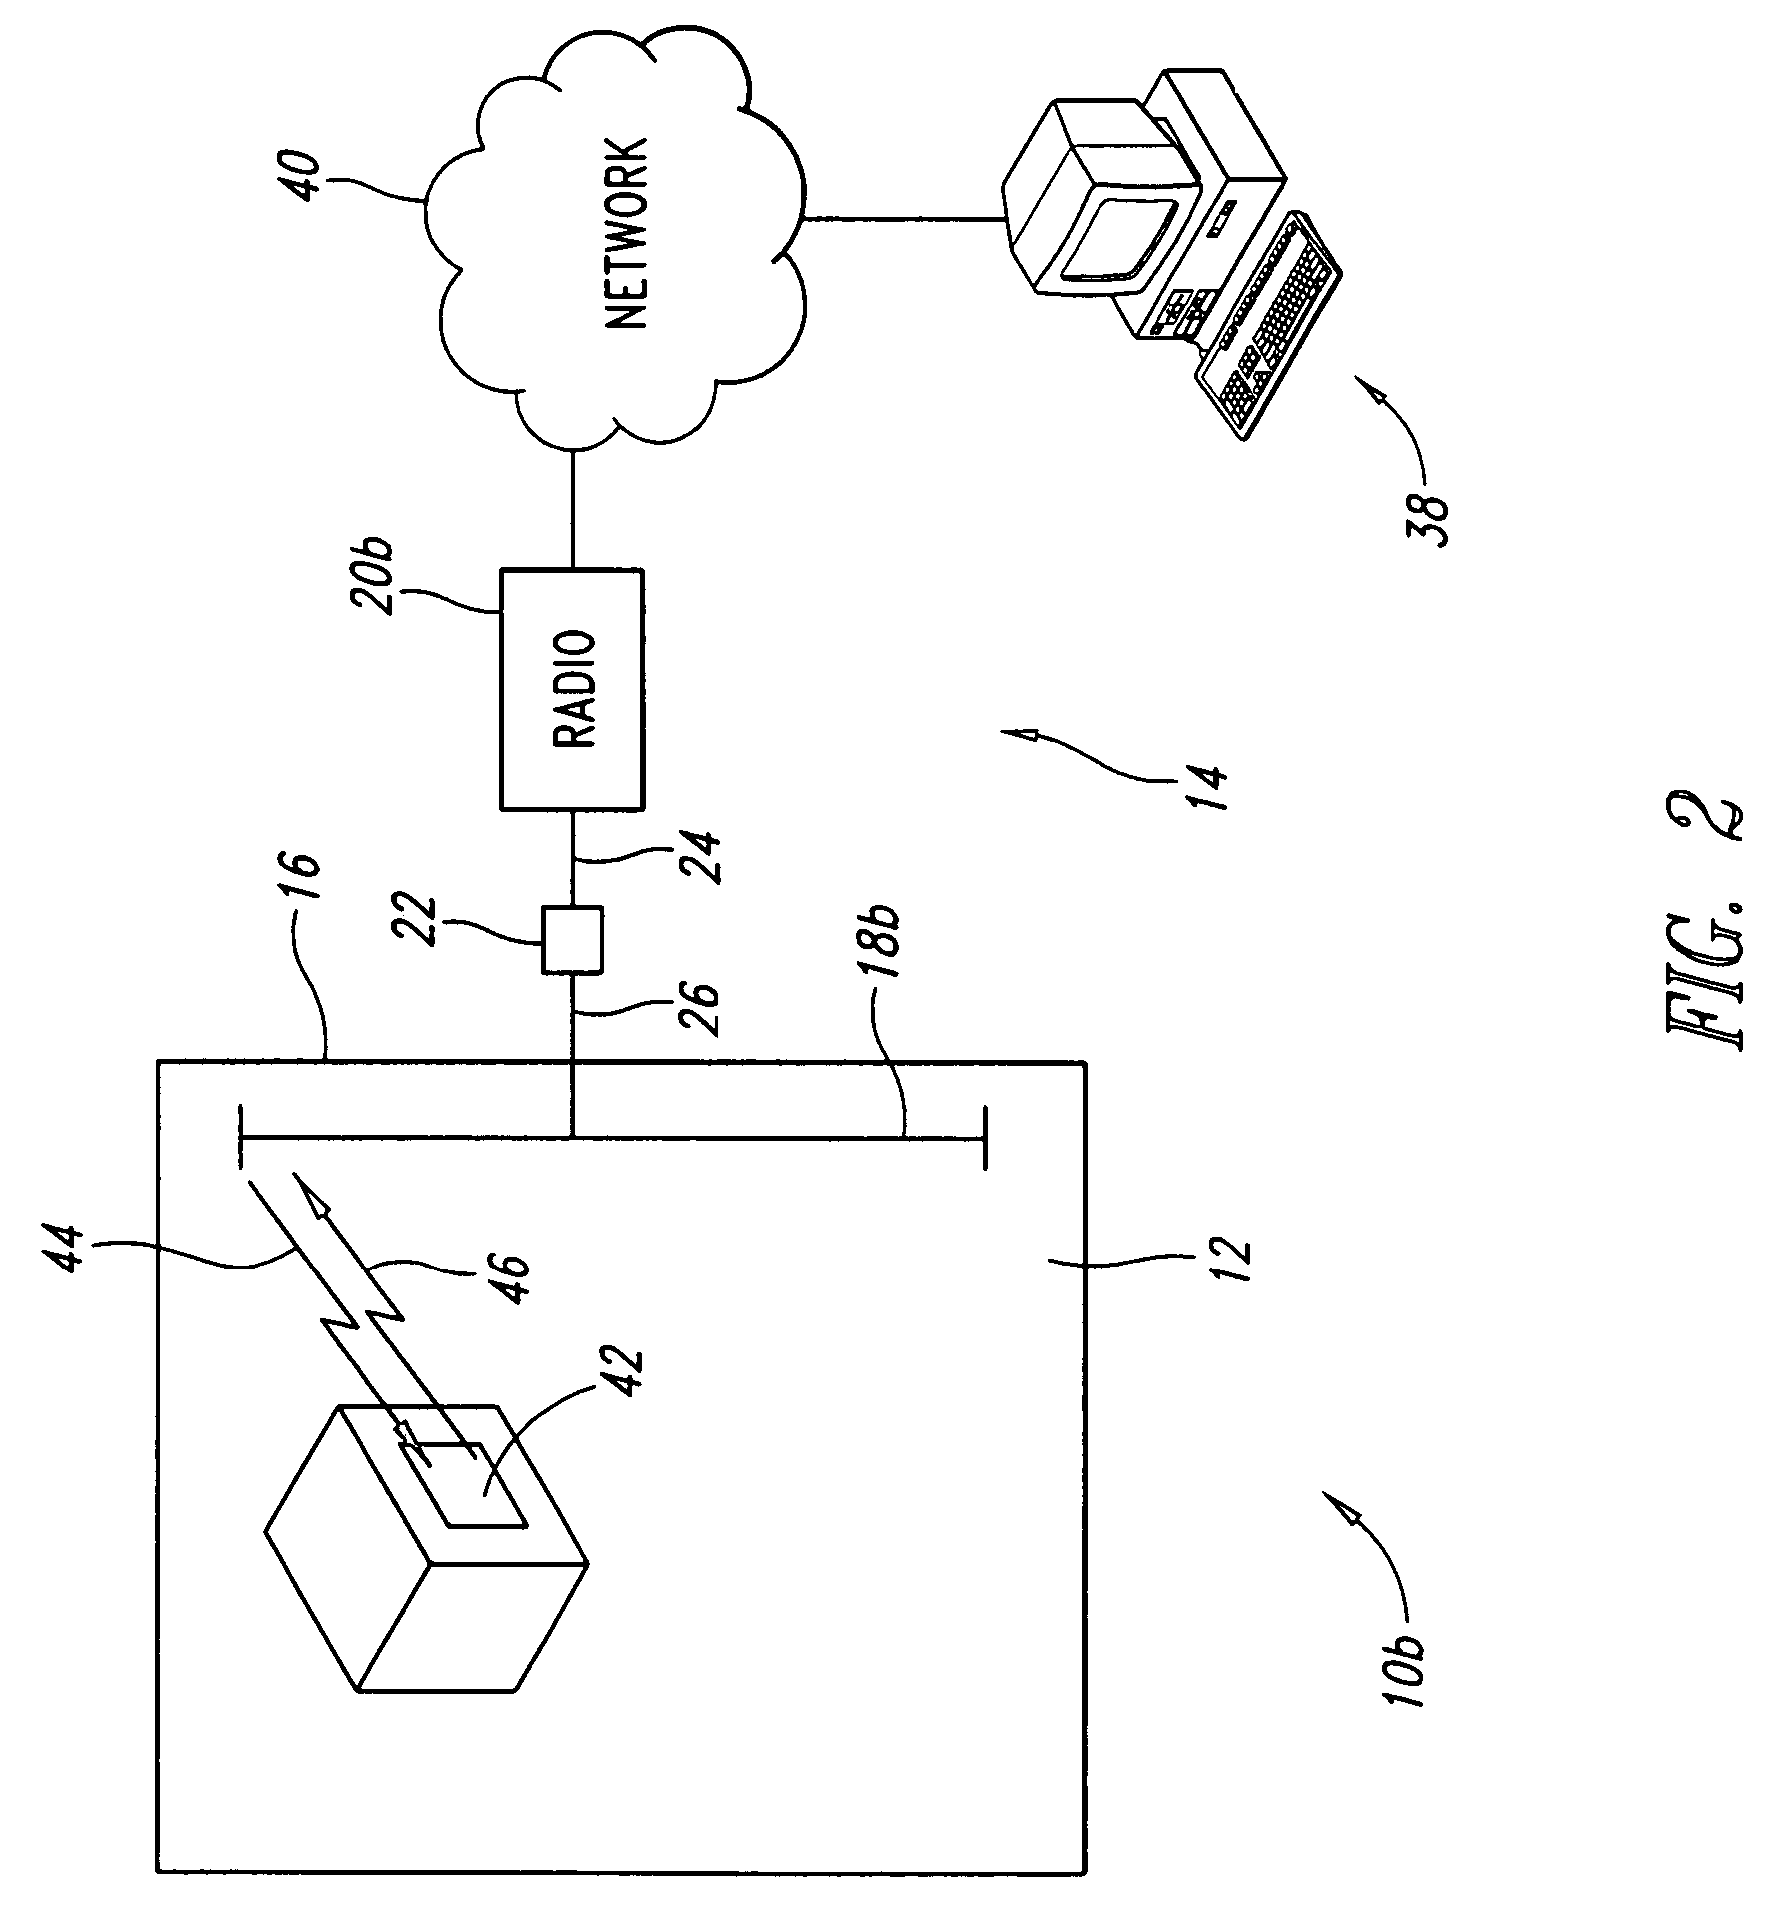 Apparatus and method to facilitate wireless communications of automatic data collection devices in potentially hazardous environments